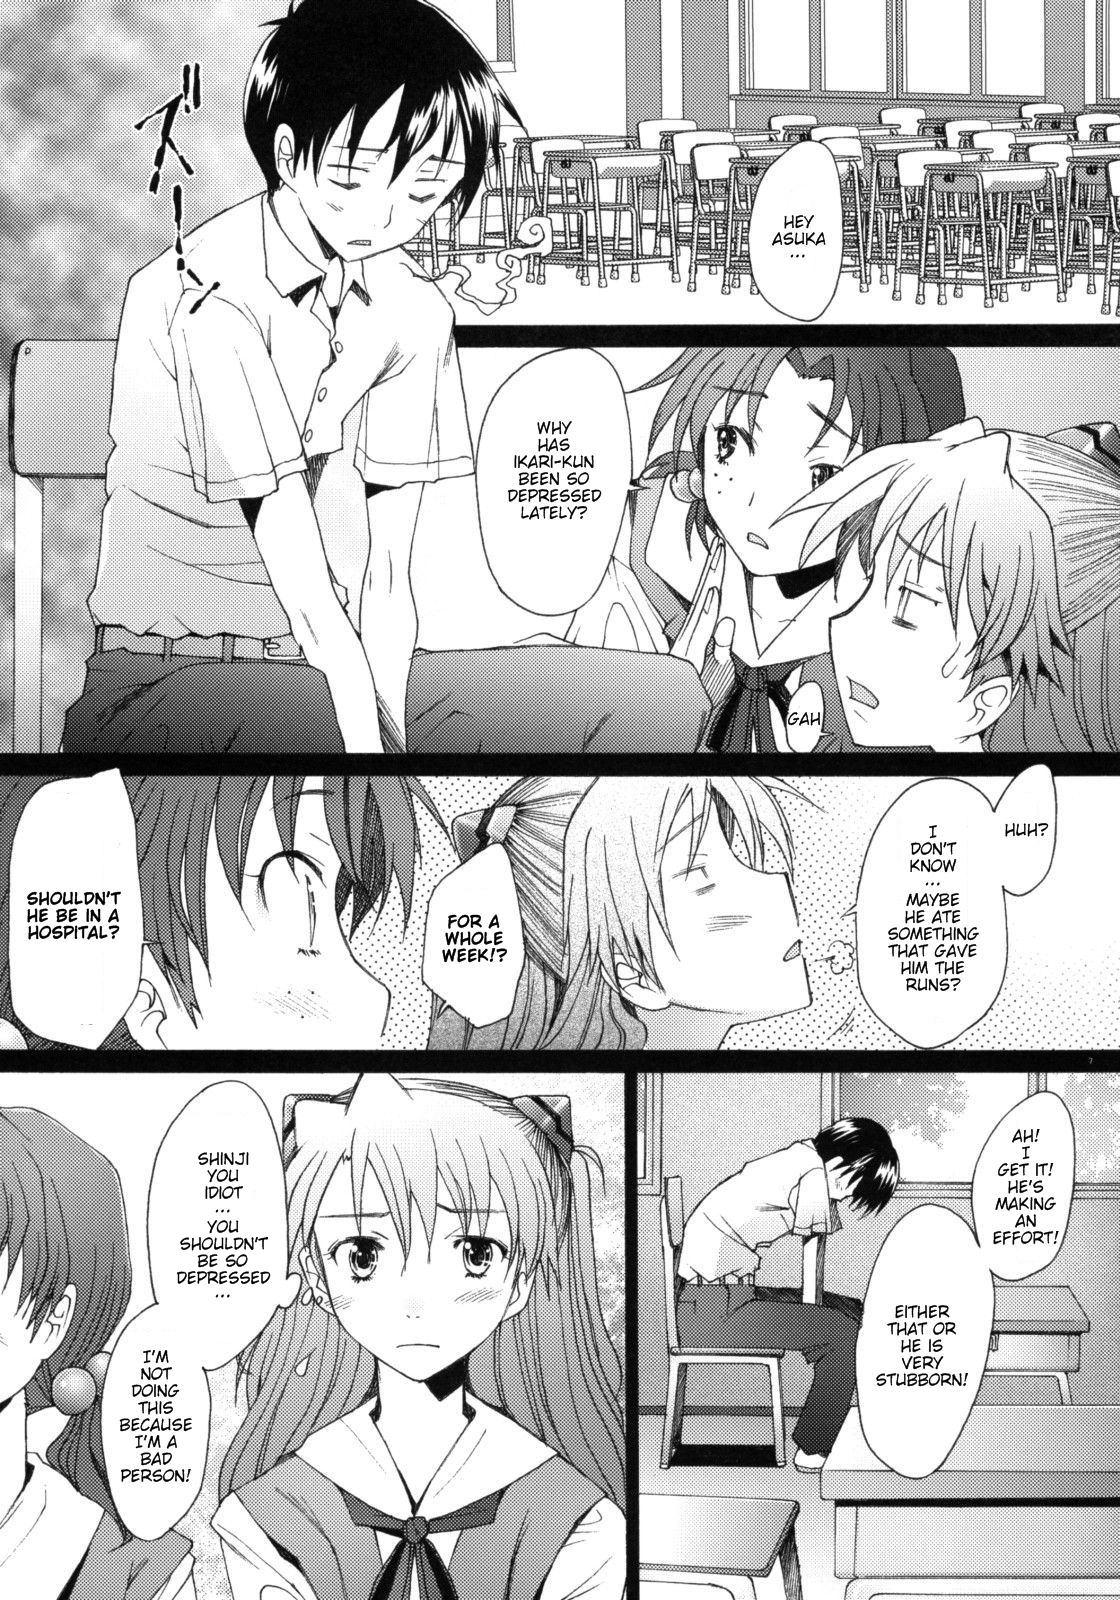 Gostosa Confusion LEVEL A vol.2 - Neon genesis evangelion Girls Getting Fucked - Page 6